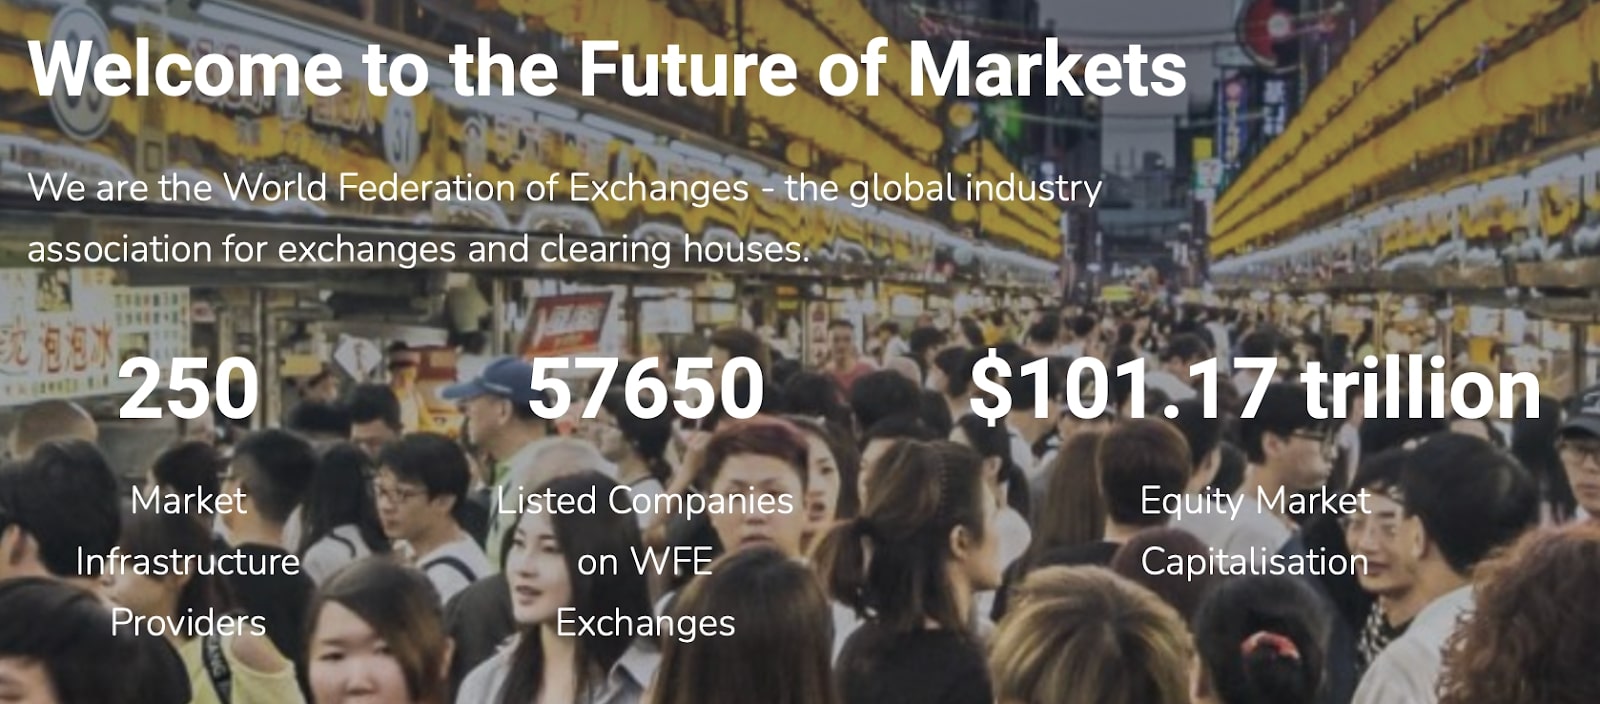 World Federation of Exchanges